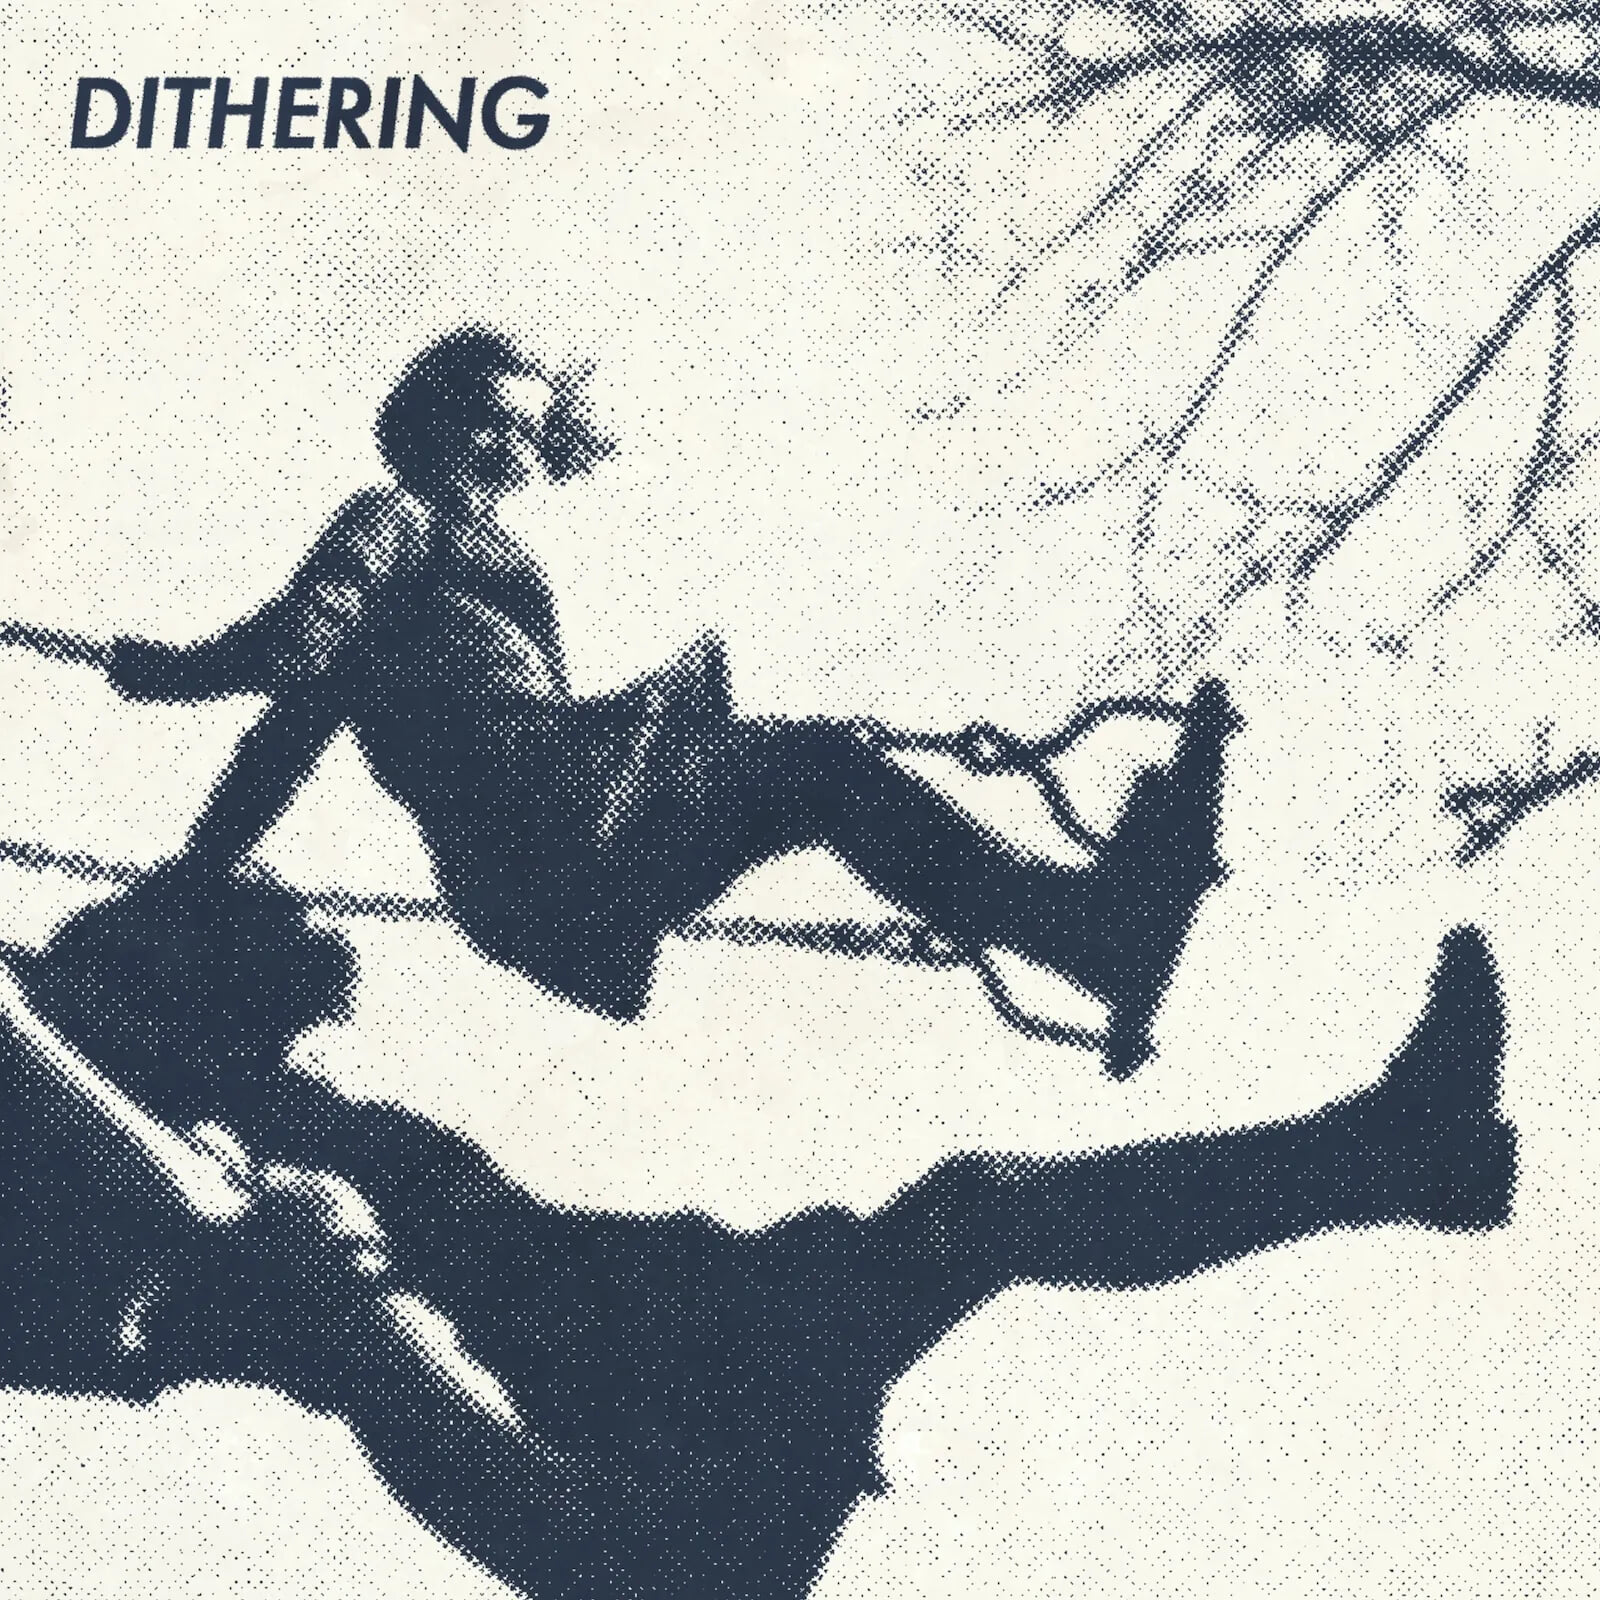 May 2023 cover art for Dithering, depicting two girls having fun on a swing set.